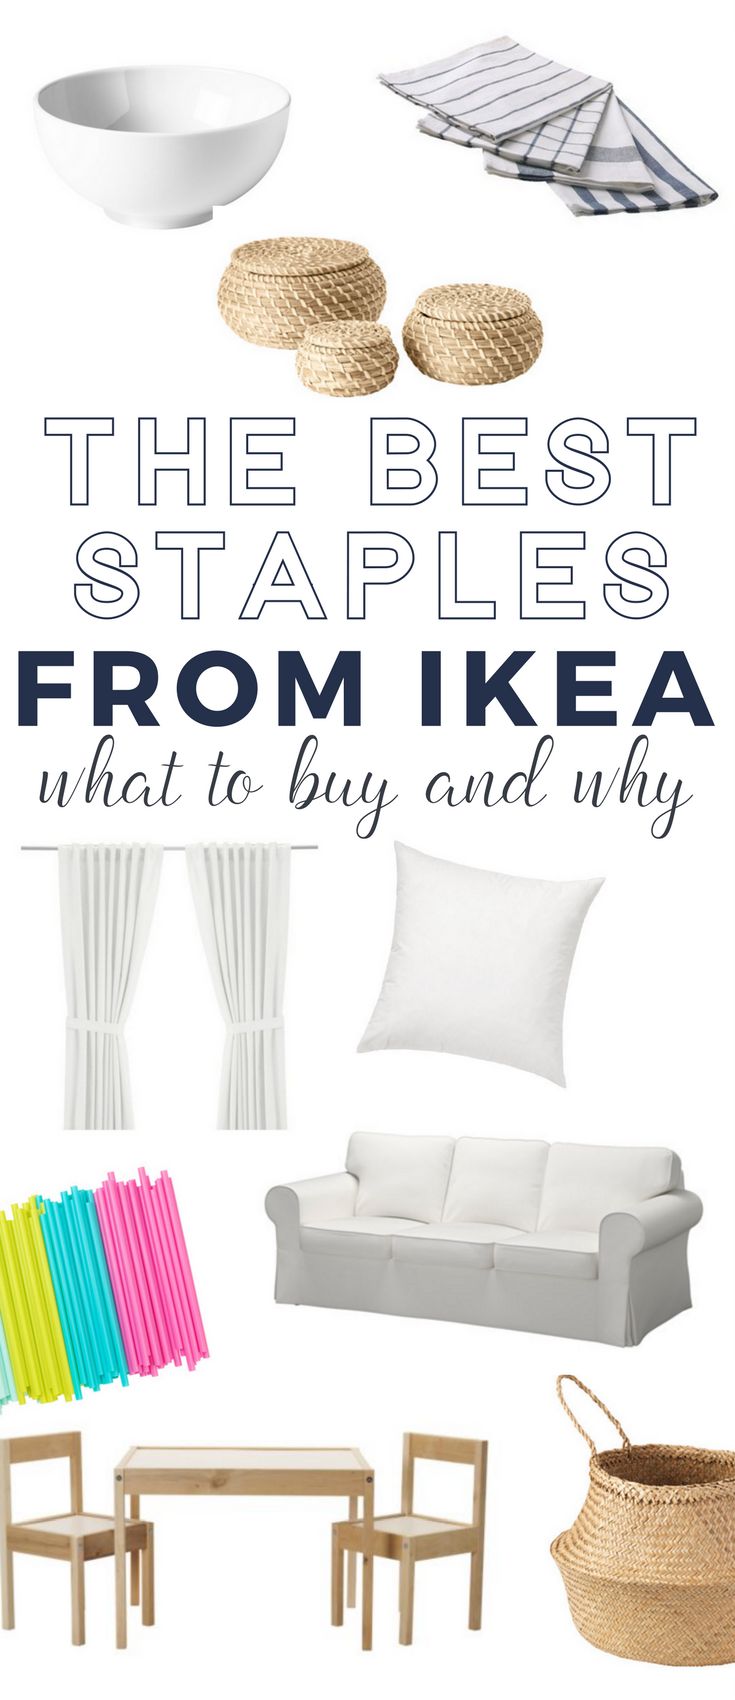 What to Buy at IKEA - a complete list of IKEA staples that everyone should know ...